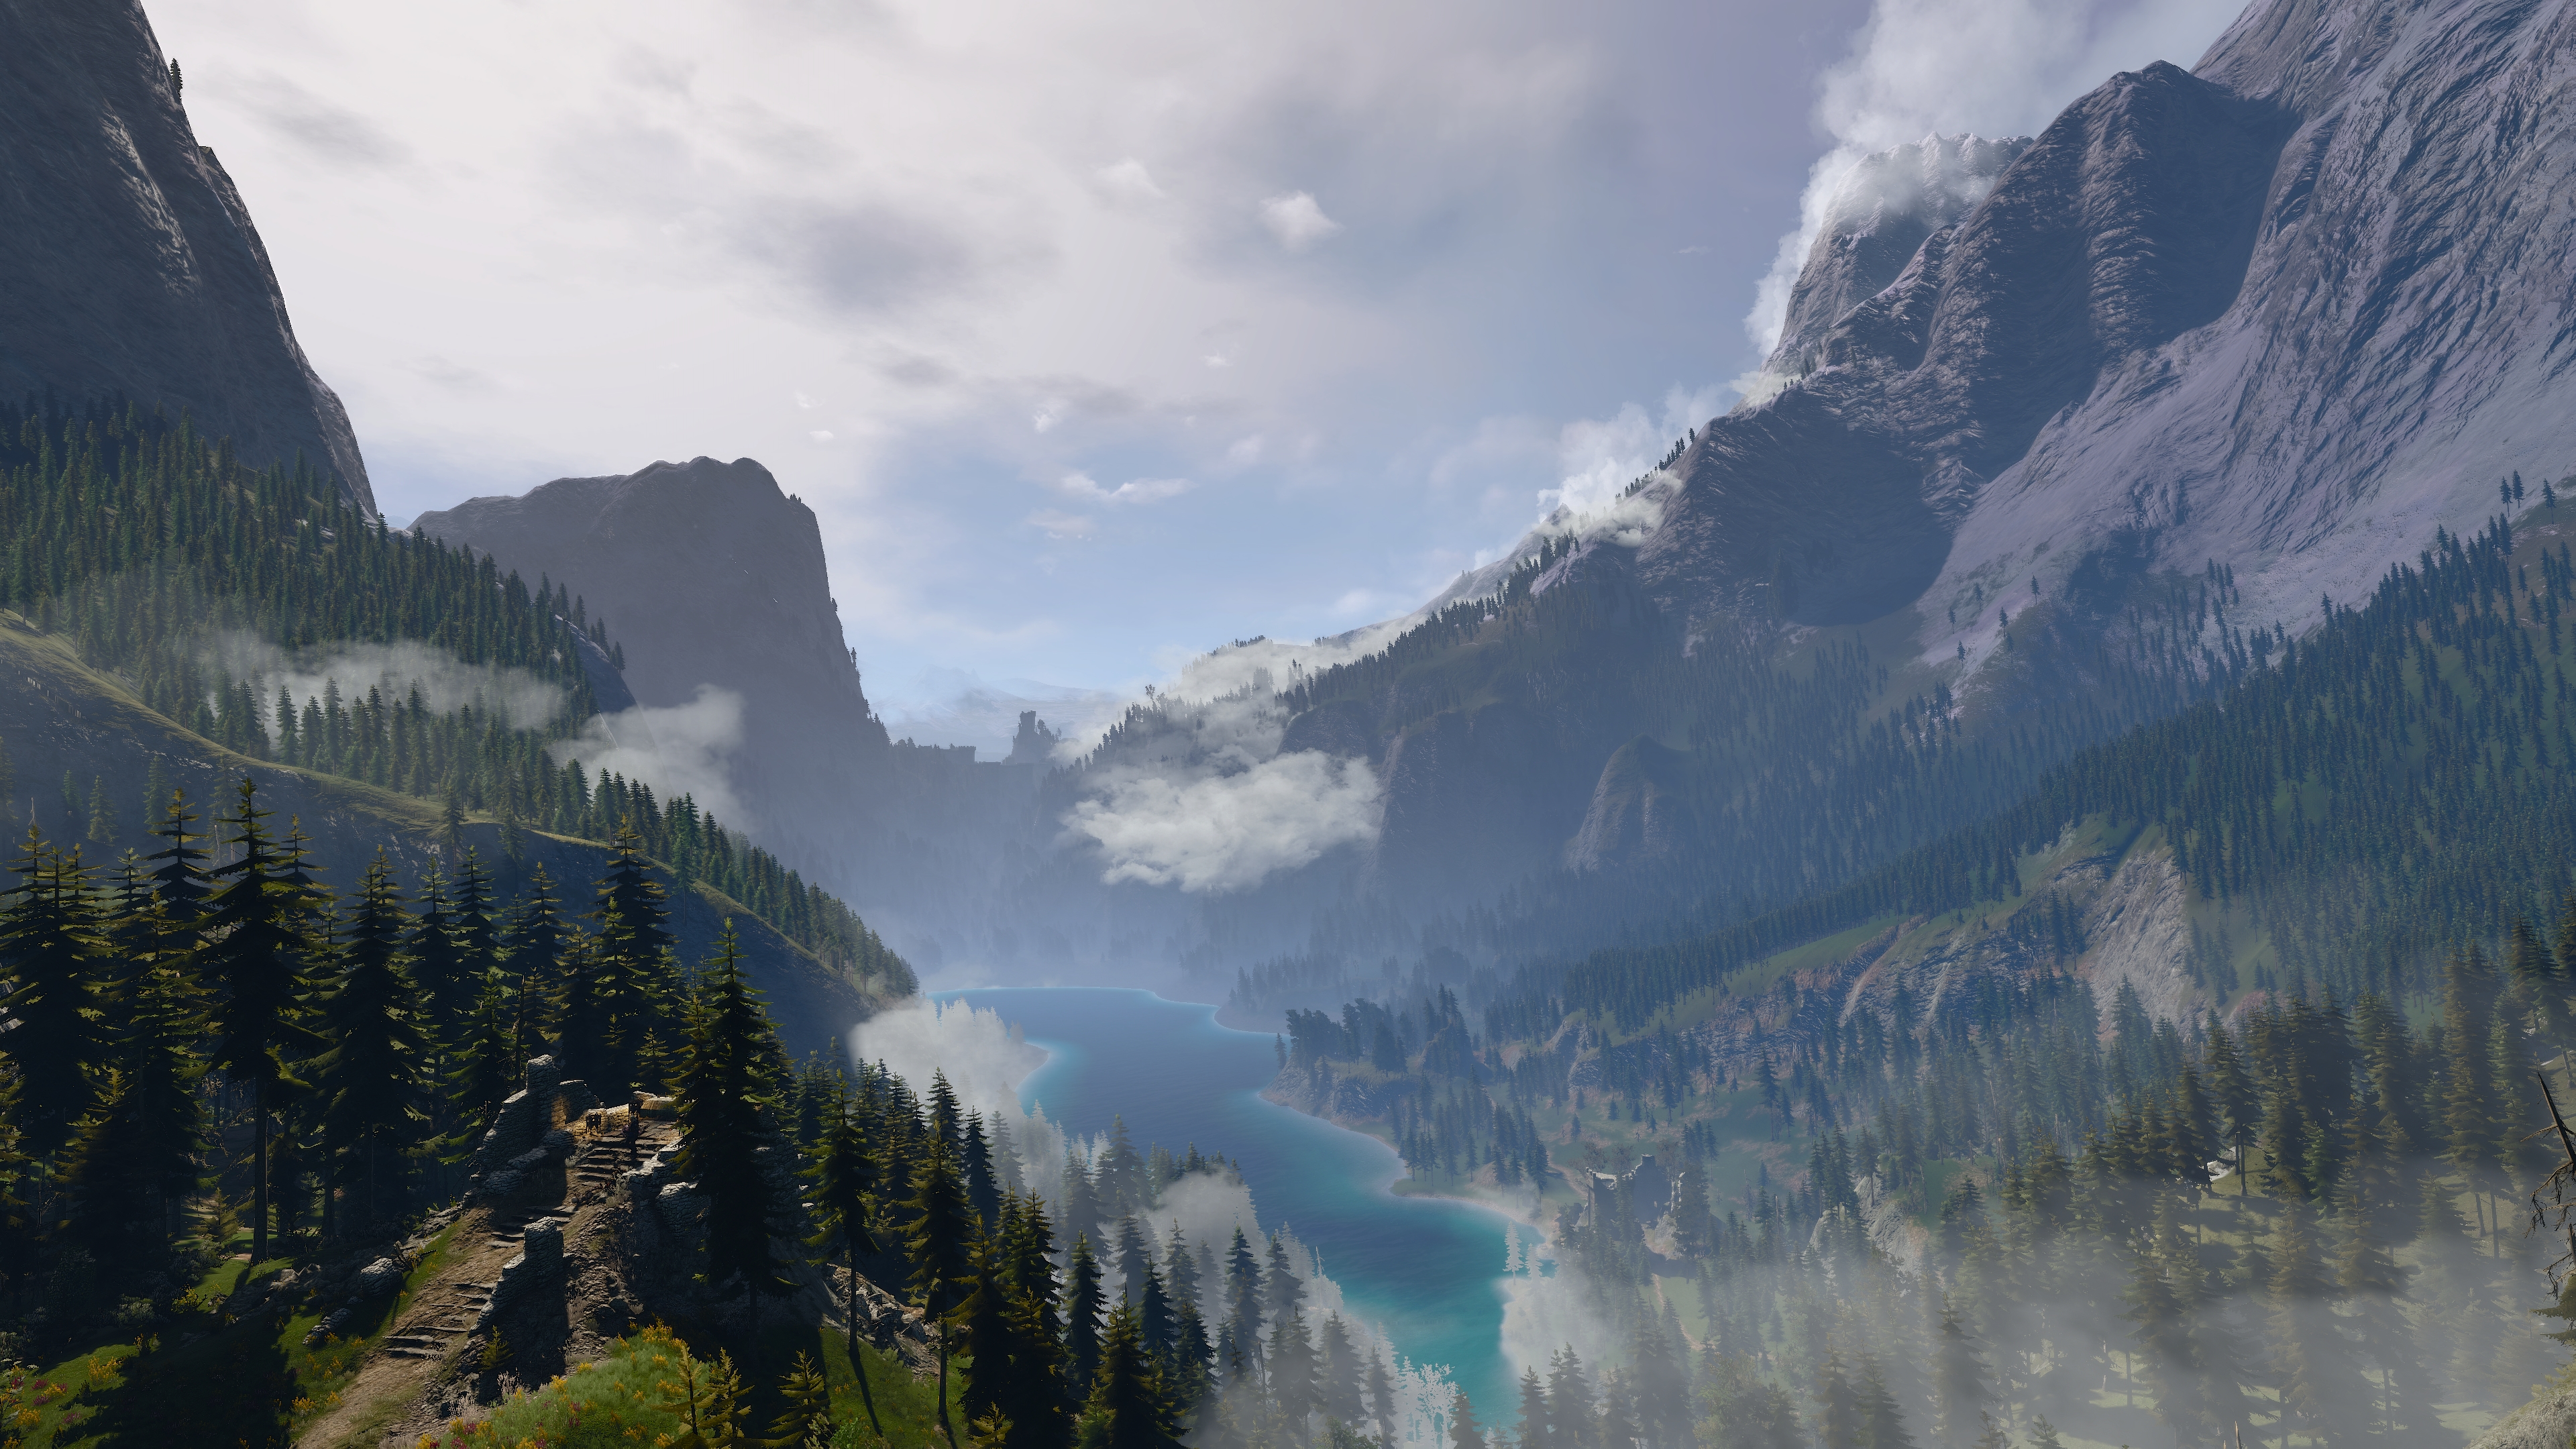 General 3840x2160 The Witcher 3: Wild Hunt screen shot PC gaming Geralt of Rivia The Witcher Kaer Morhen landscape video game art digital art video games sunlight trees forest water clouds sky CGI